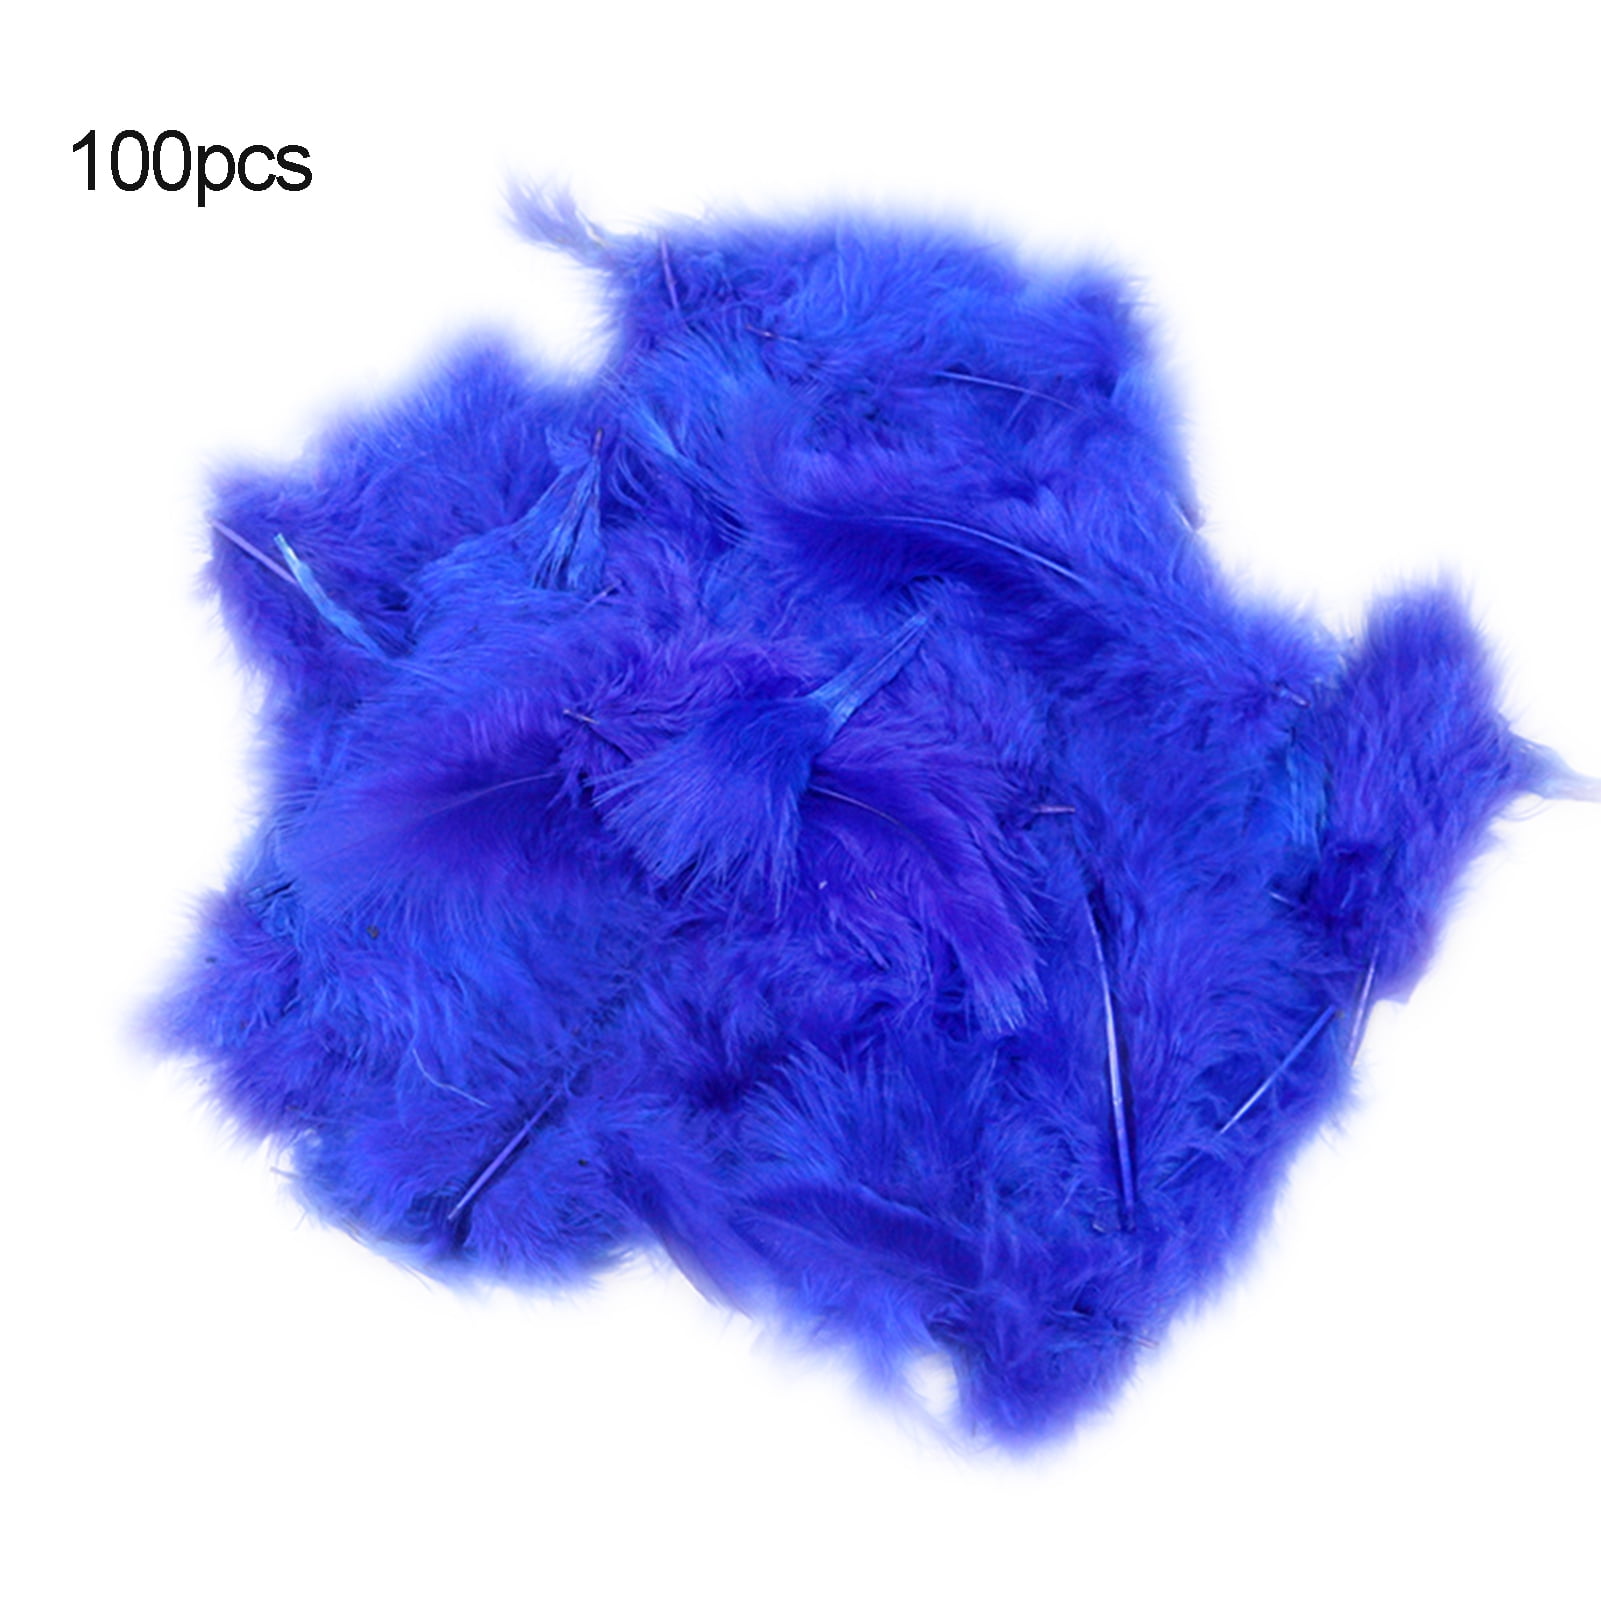 100 pcs Feathers Marabou 2-4 Inch Sewing Craft Wedding Party Decorations